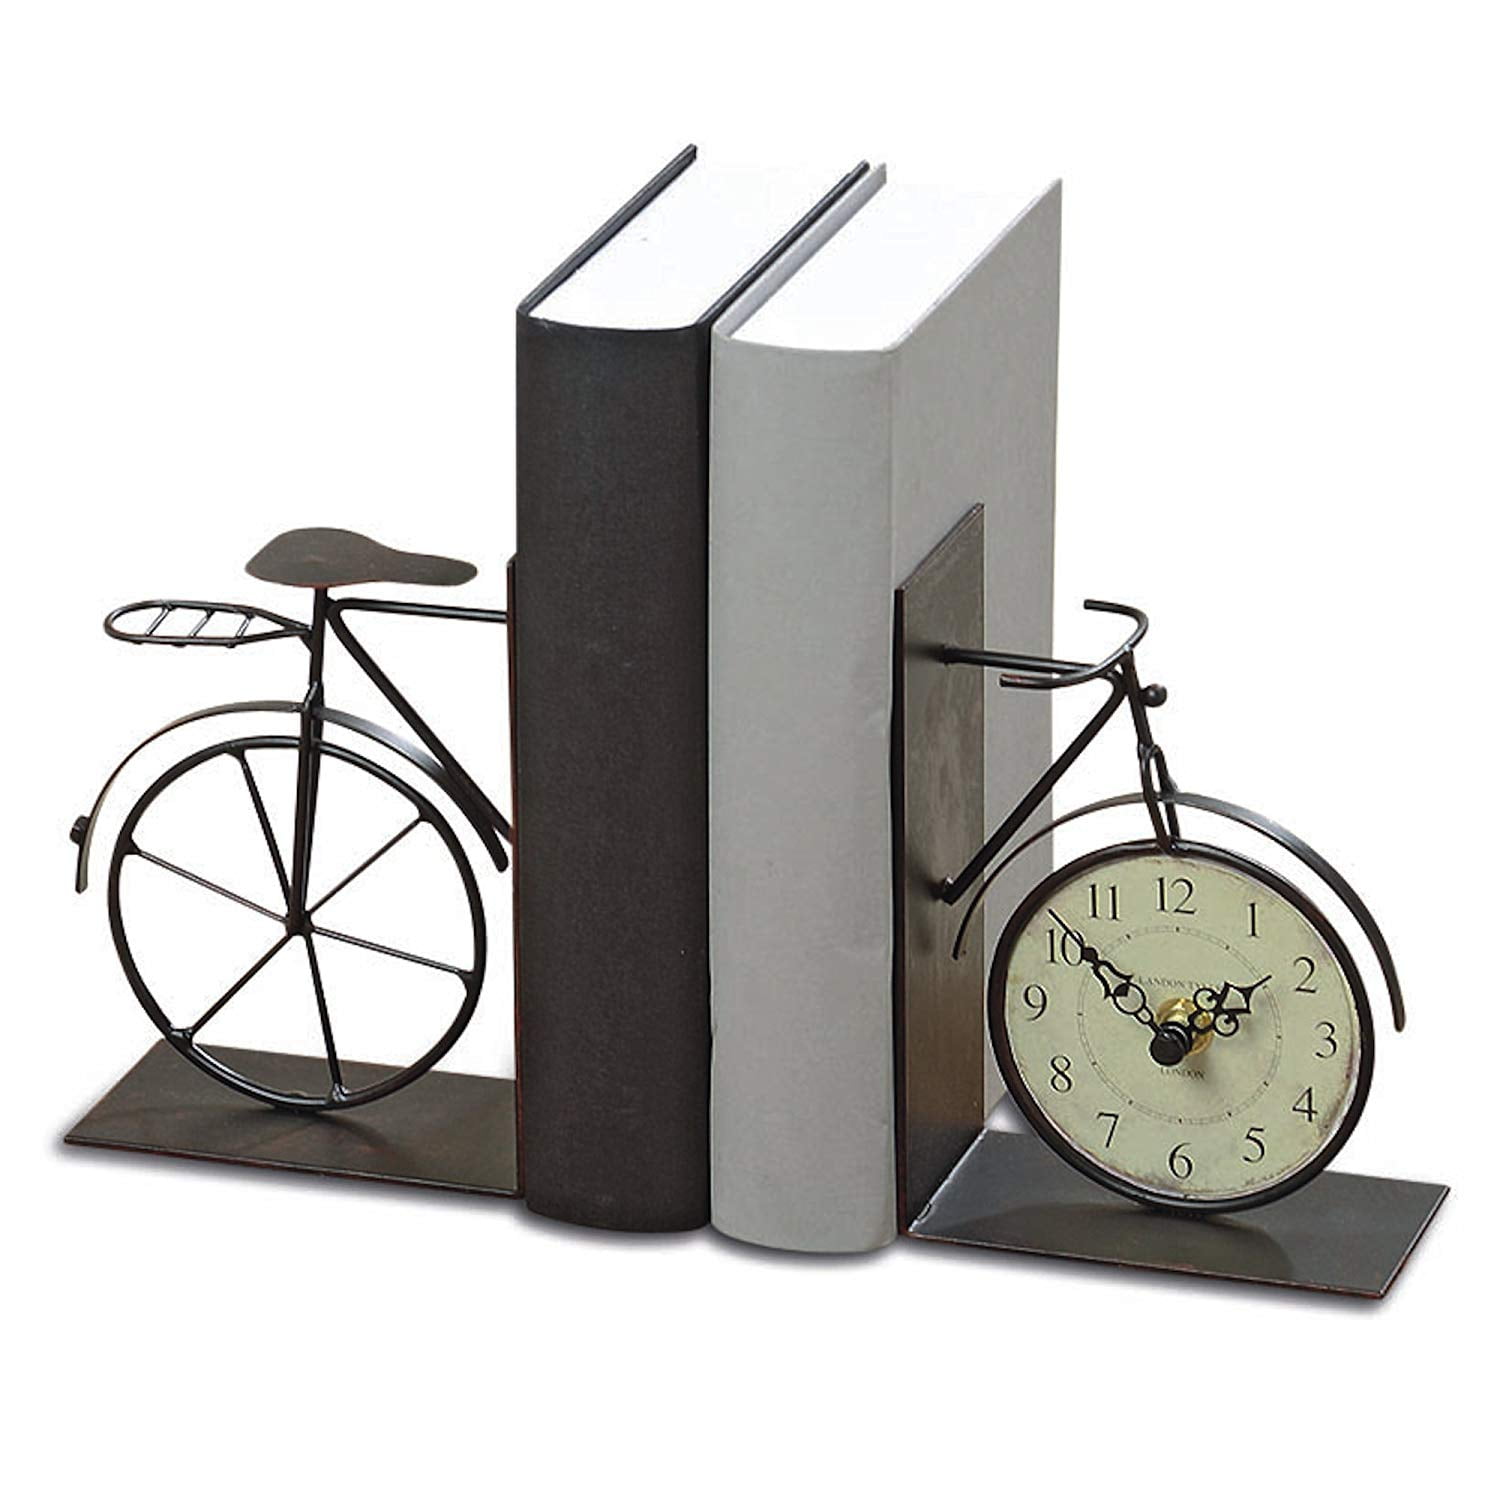 Handcrafted of Bent and Welded Black Iron 1 AA Battery The Industrial Chic Bicycle Bookends with Analog Clock Set of 2 Not Included Combined 22 cm Long 